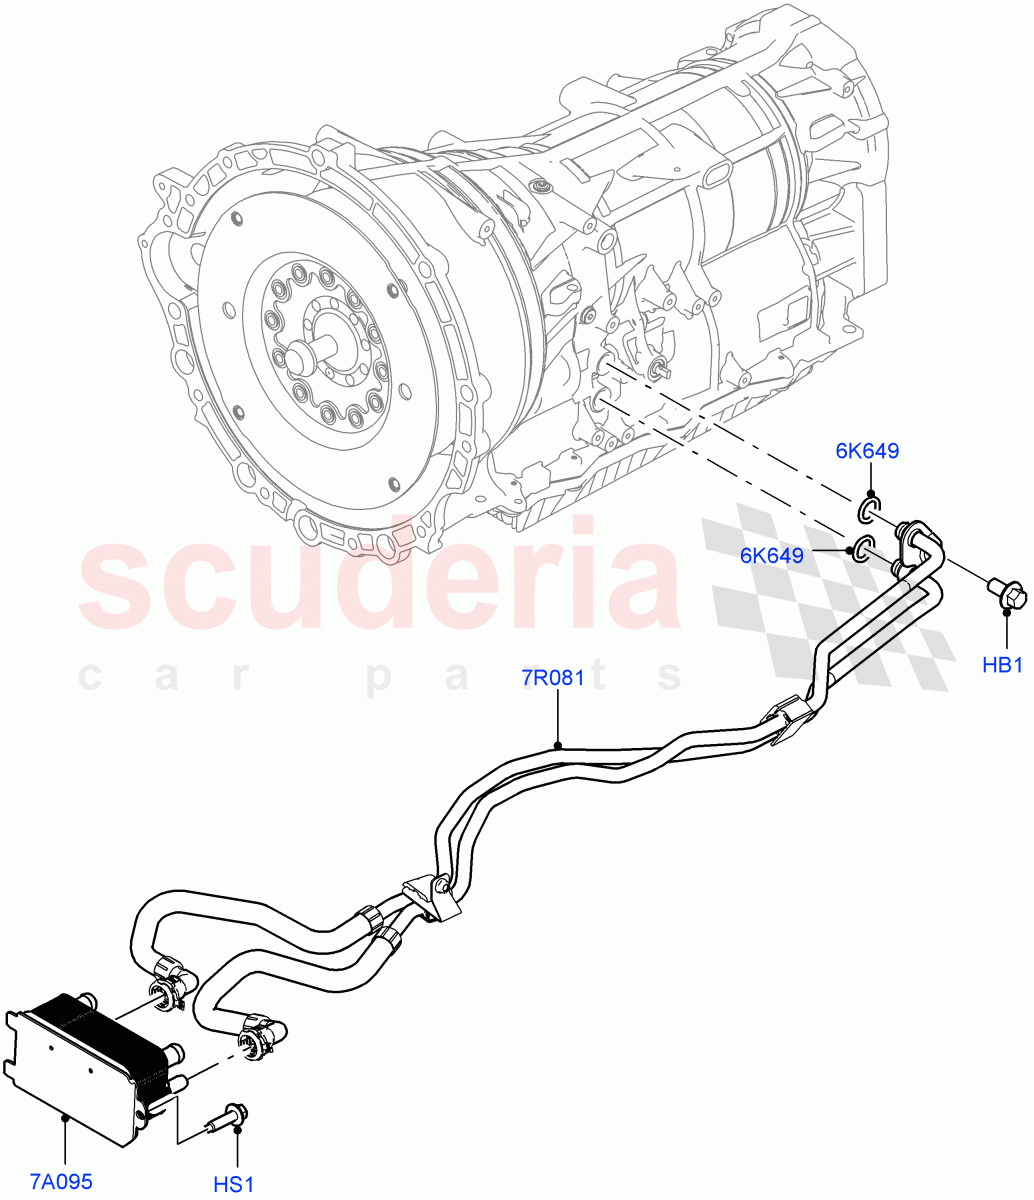 Transmission Cooling Systems(Solihull Plant Build)(2.0L I4 High DOHC AJ200 Petrol,8 Speed Auto Trans ZF 8HP45)((V)FROMJA000001) of Land Rover Land Rover Discovery 5 (2017+) [3.0 DOHC GDI SC V6 Petrol]